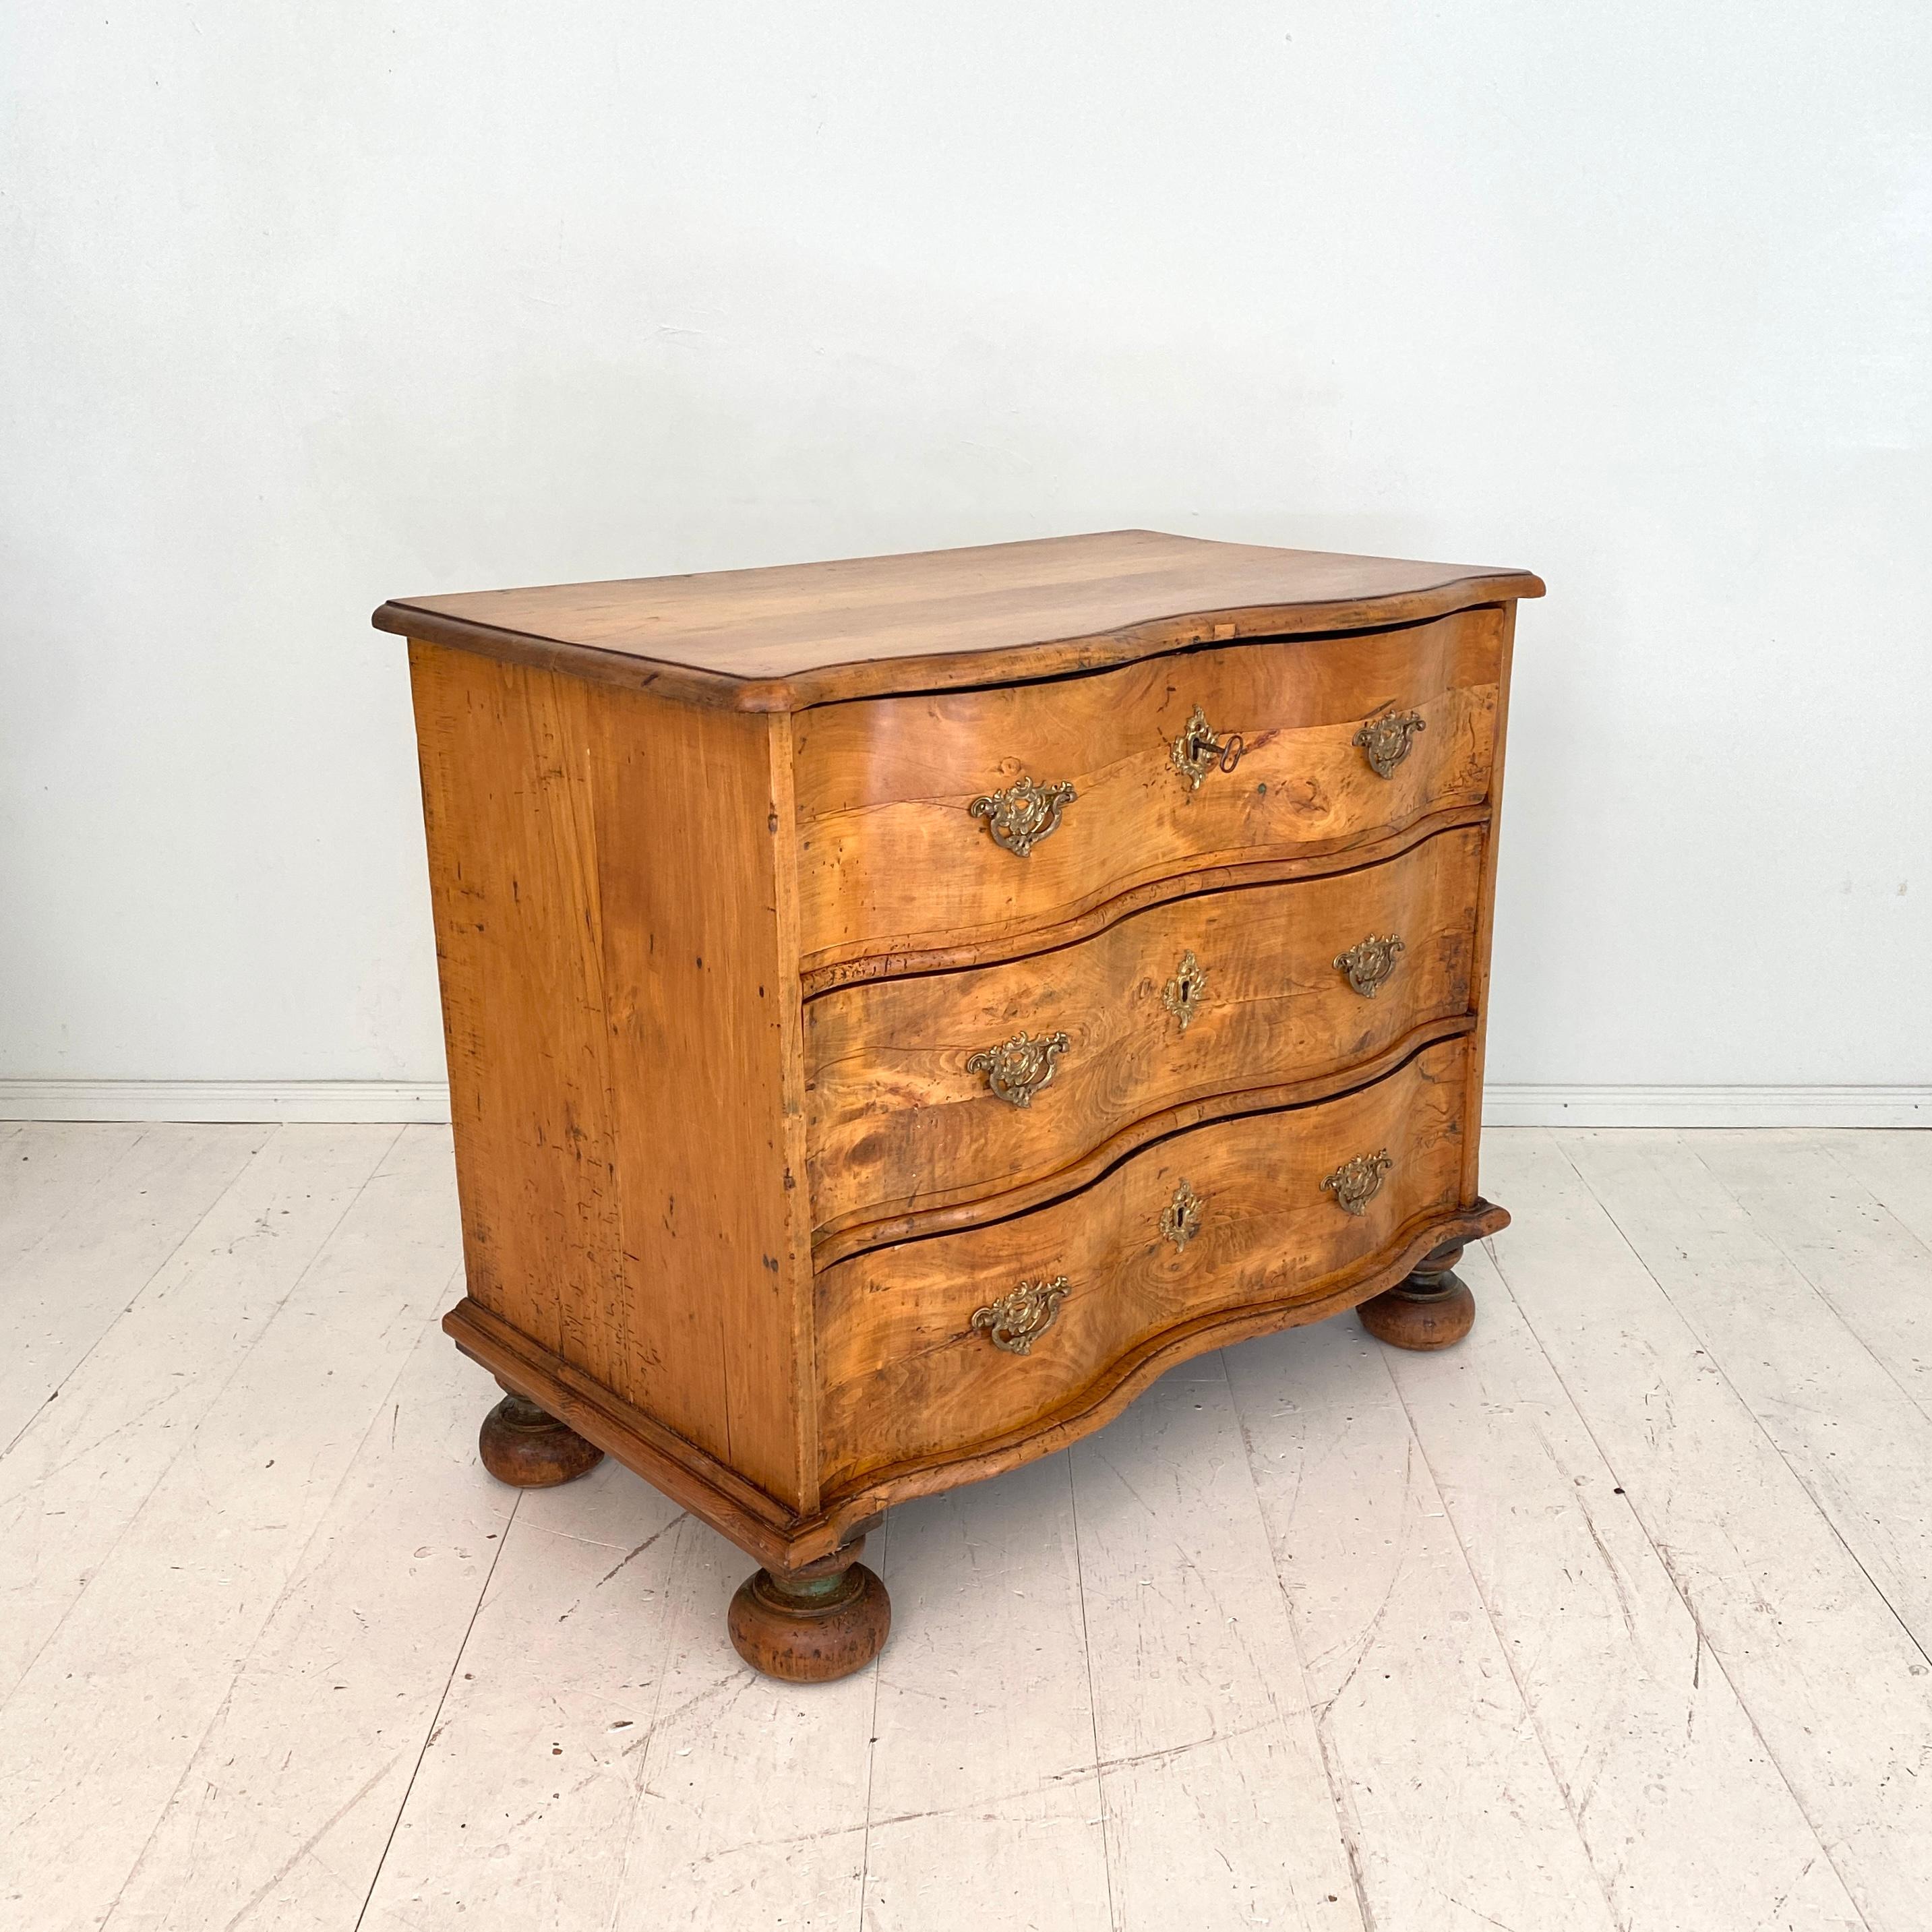 This Early 18th Century German Baroque Commode was made around 1730 in South Germany.
It is made out of solid cherrywood and the drawers are made in Pine.
It is in beautiful condition and has got a great Patina. The old locks and the key are still